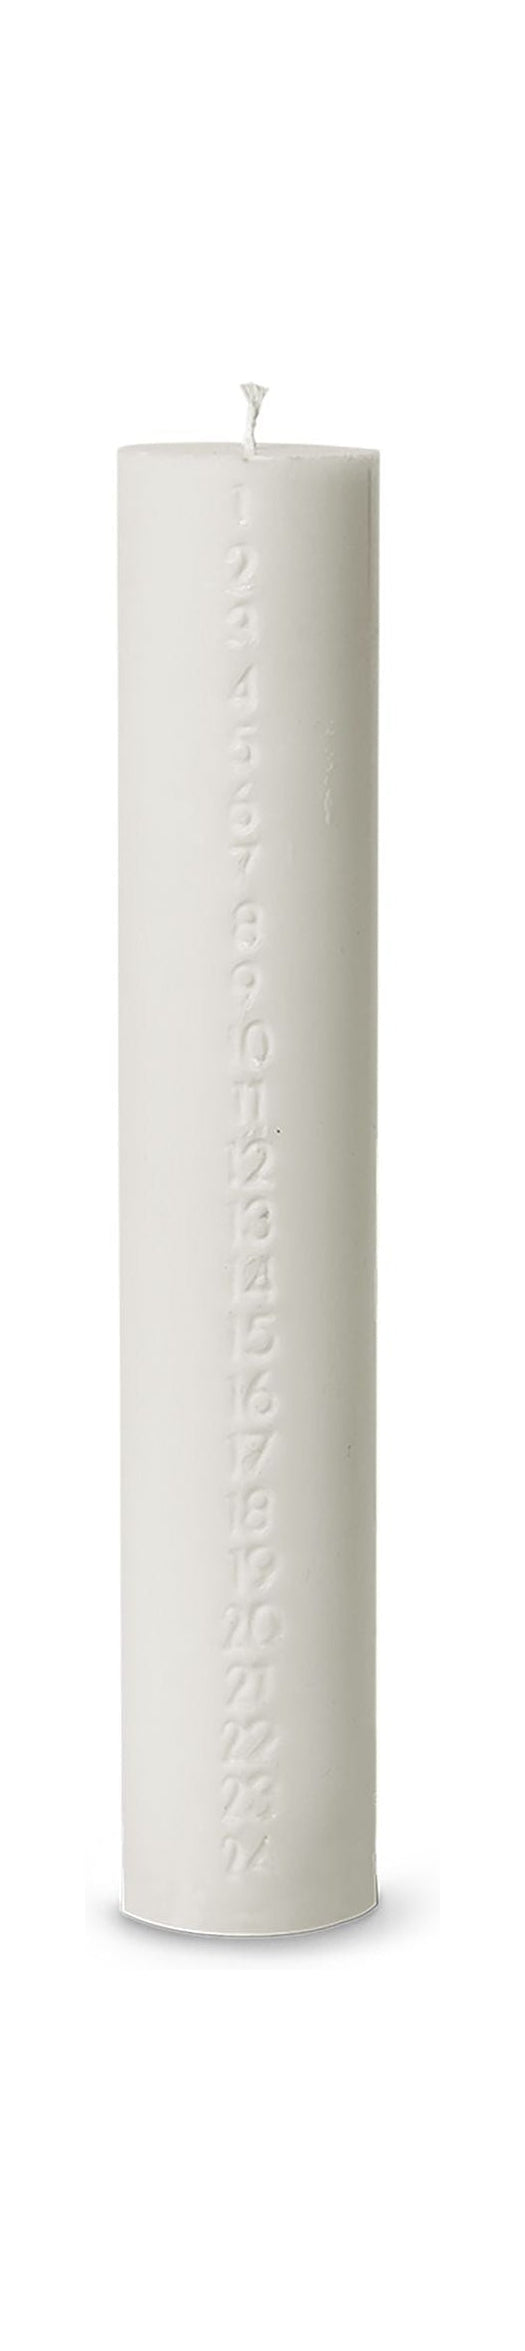 Ferm Living Pure Advent Candle, Snow White